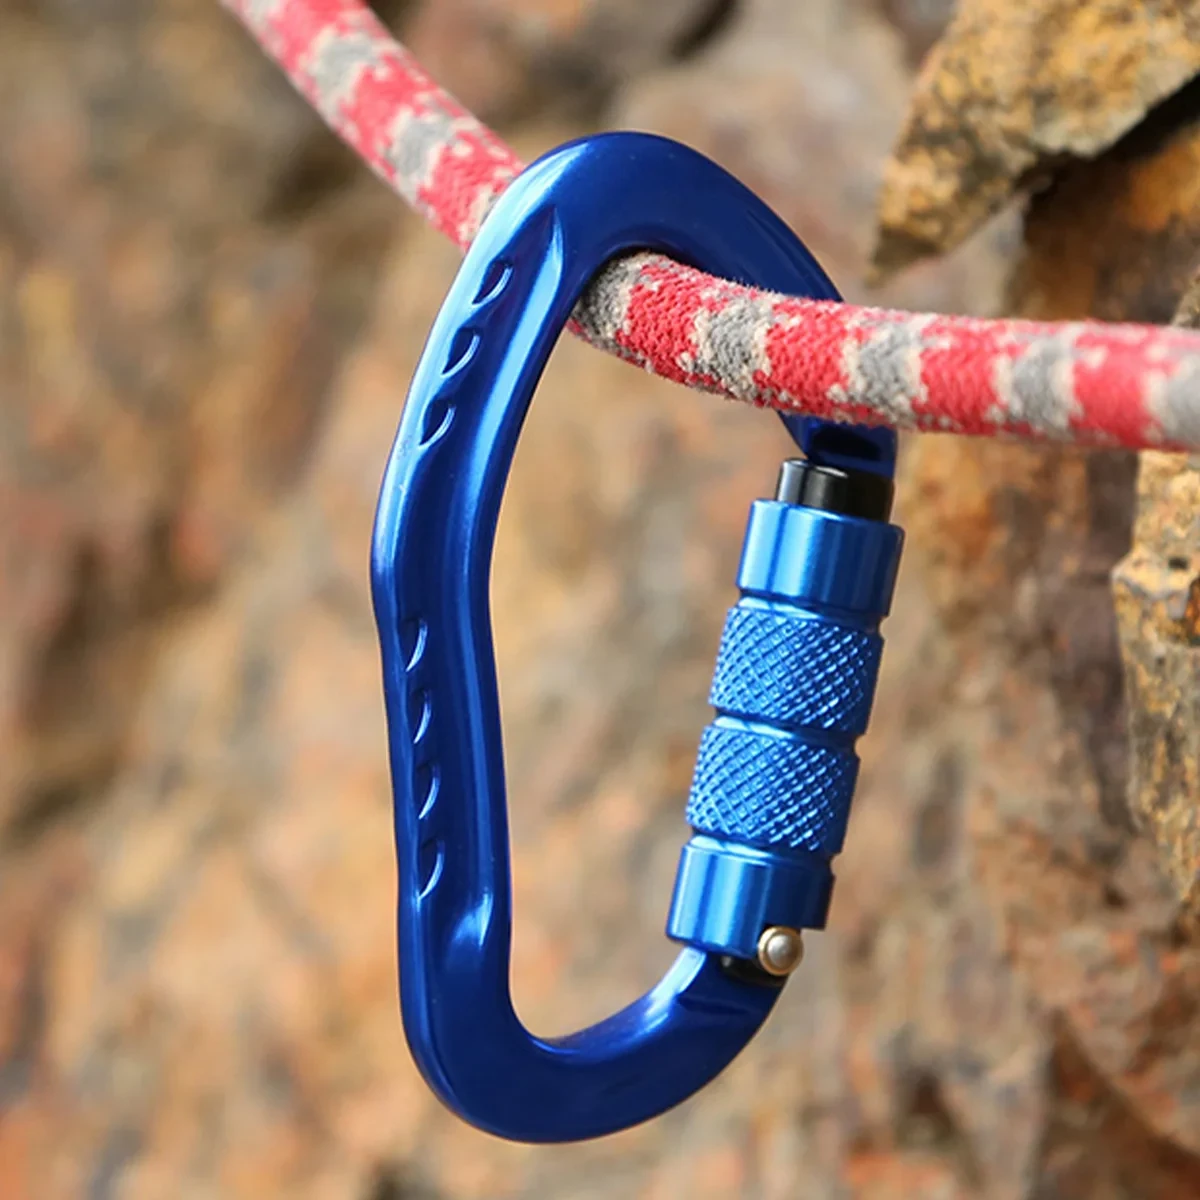 Evaluating the Quality and Safety of Wholesale Rock Climbing Gear